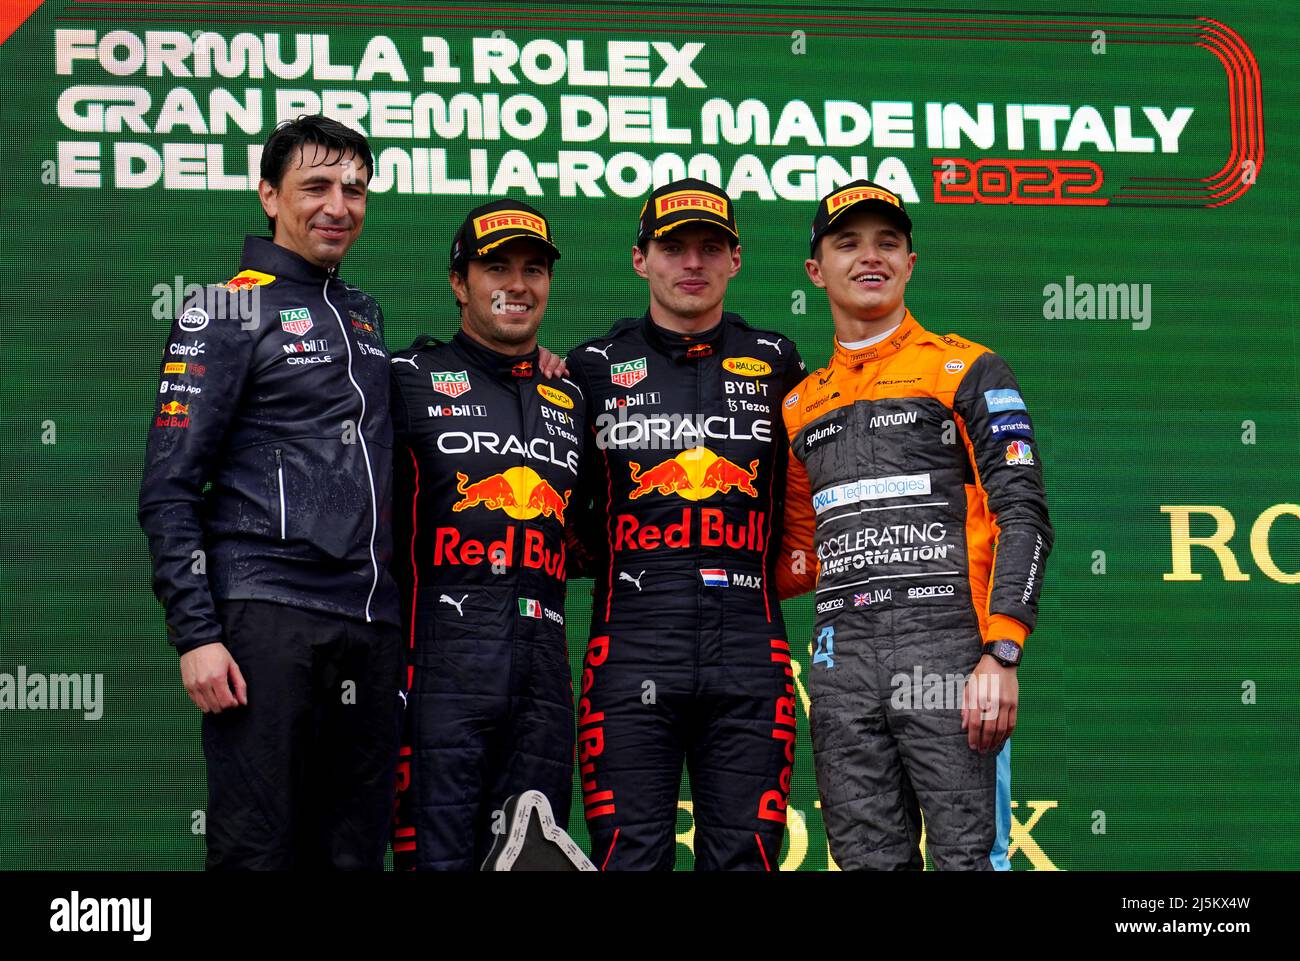 Red Bull Racing Technical Director Pierre Wache, Red Bull Racing's Sergio Perez, Red Bull's Max Verstappen and McLaren's Lando Norris on the podium after the Emilia Romagna Grand Prix at the Autodromo Internazionale Enzo e Dino Ferrari circuit in Italy, better known as Imola. Picture date: Sunday April 24, 2022. Stock Photo